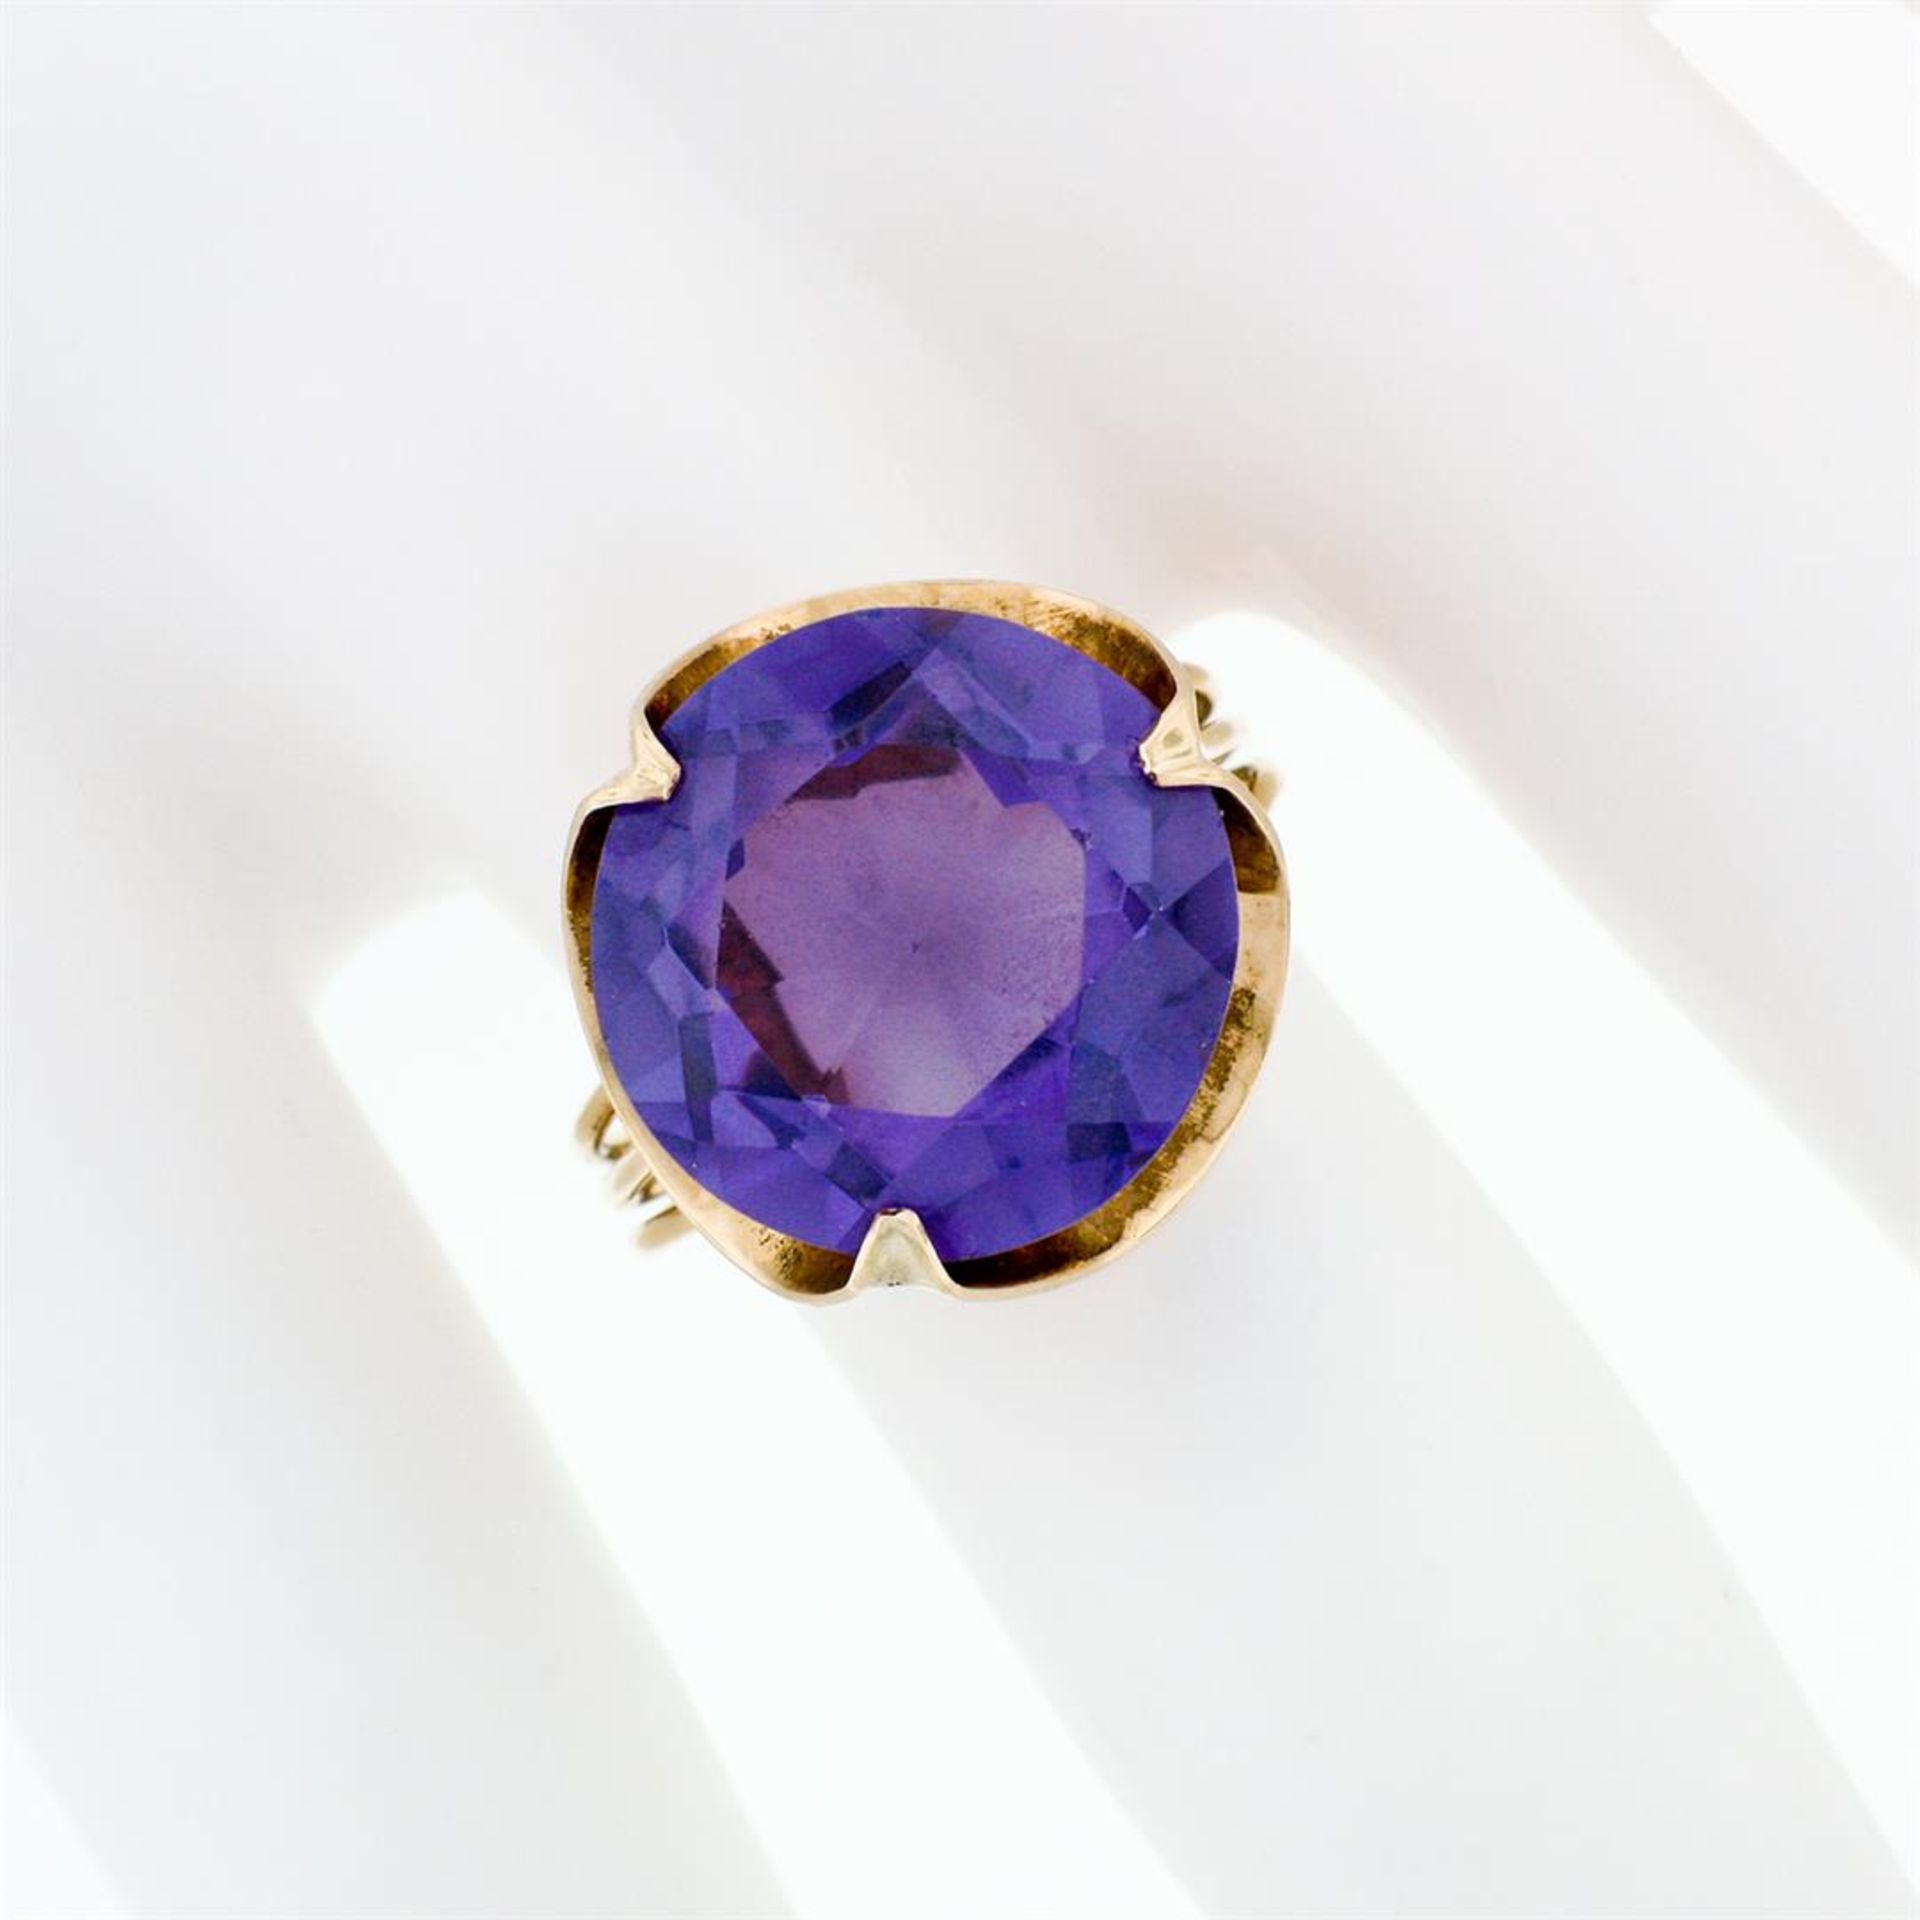 Retro Vintage Handmade 14k Rose Gold 13.7mm Synthetic Alexandrite Solitaire Ring - Image 3 of 8